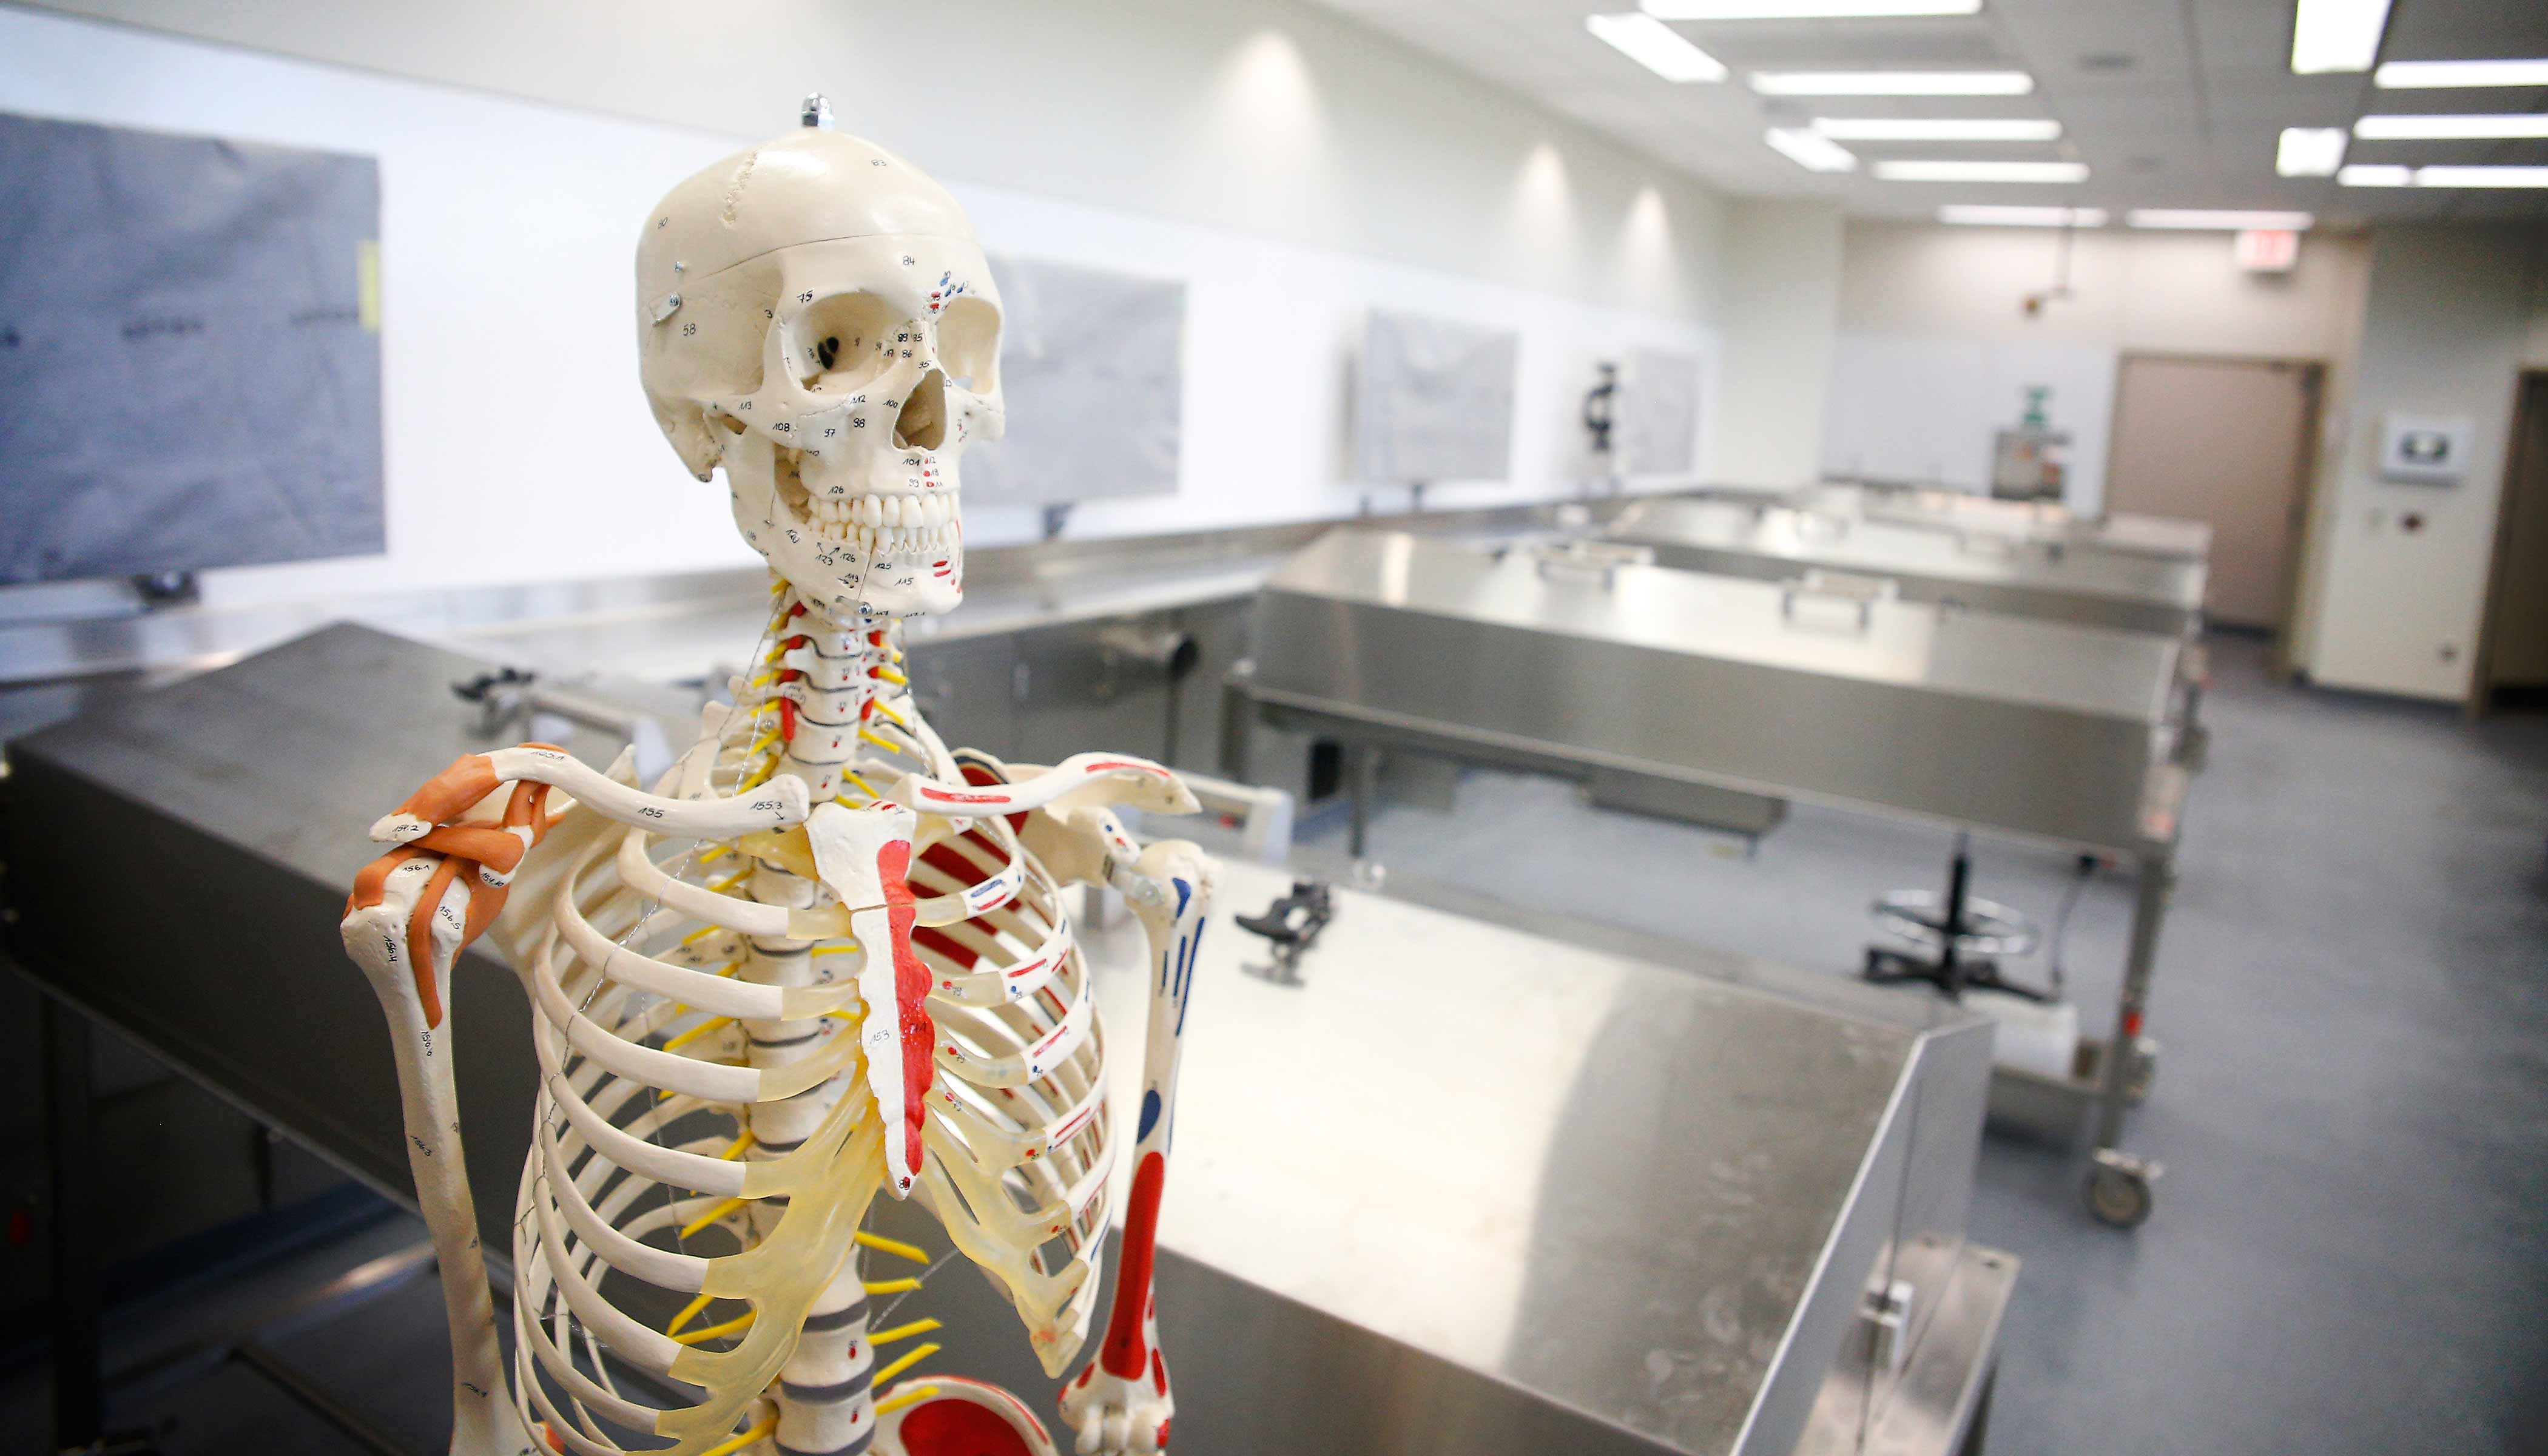 The anatomy lab inside the Health Science Ed Complex also serves as the holding area for cadavers. In addition to the anatomy lab, there are laboratories for orthopedics, rehabilitation, patient assessment and skills, as well as an energized radiography suite where students can learn proper x-ray positioning and techniques using state-of-the-art clinical equipment.